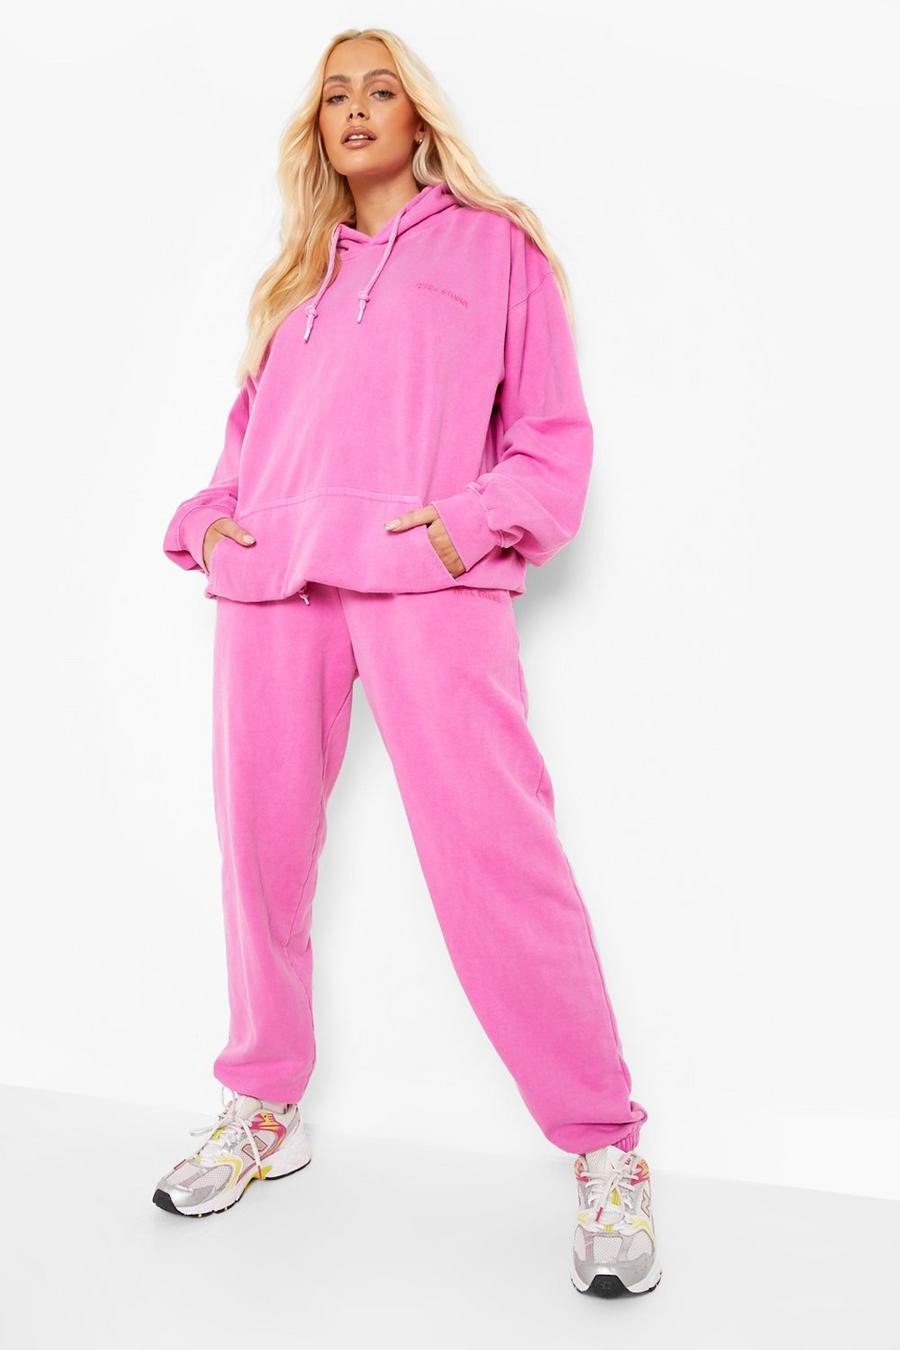 Hot Pink Overdyed Hooded Tracksuit